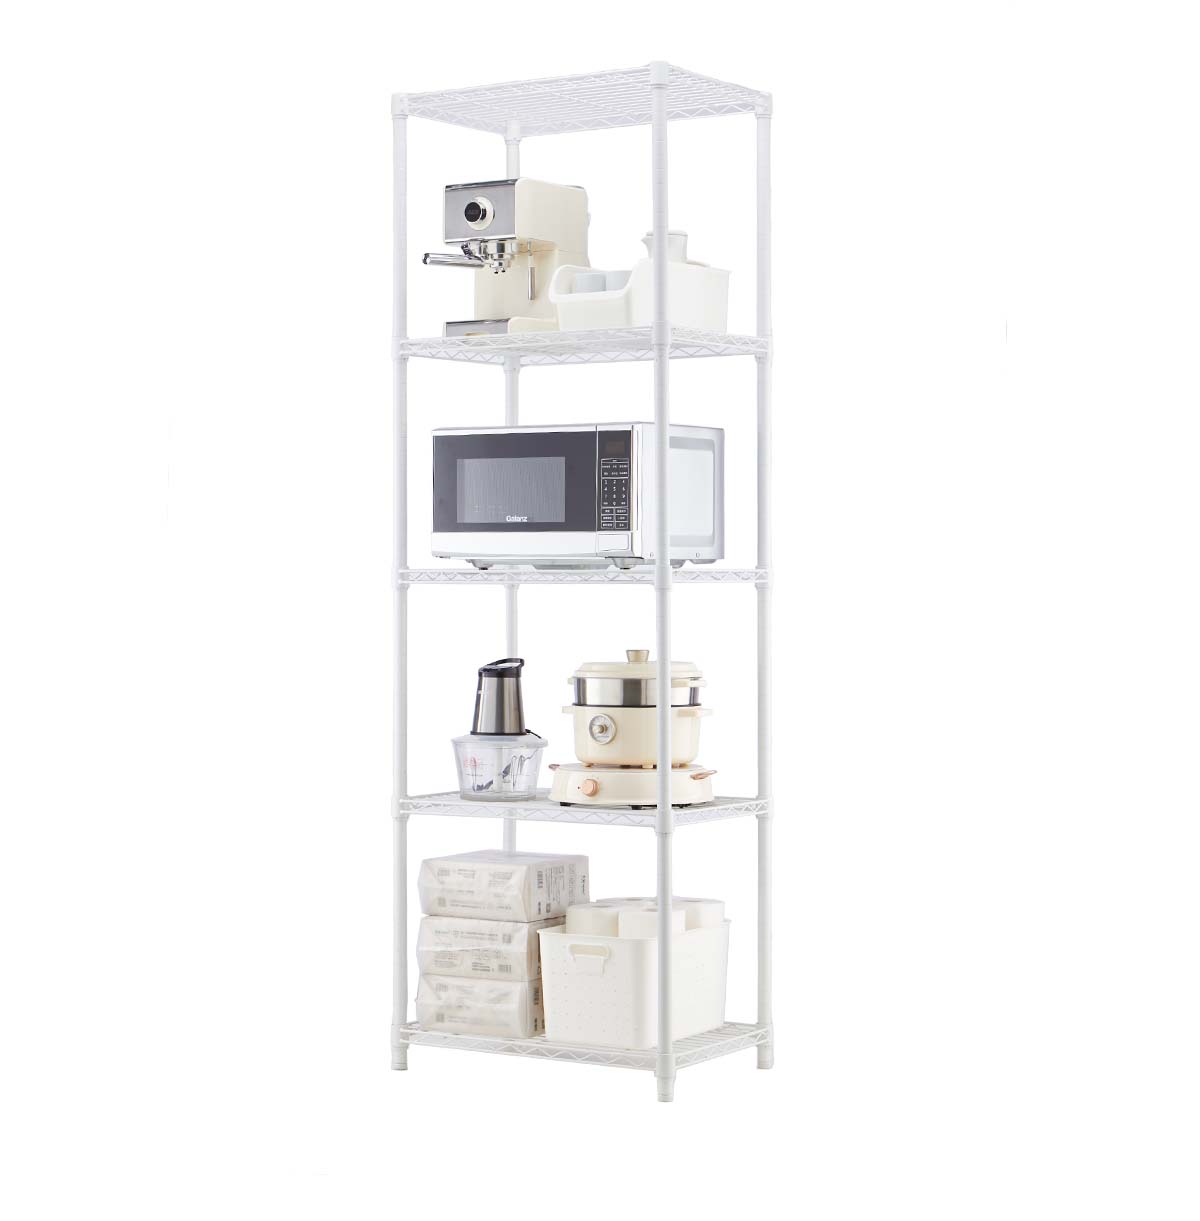 cabinet organizer and storage shelves Solution